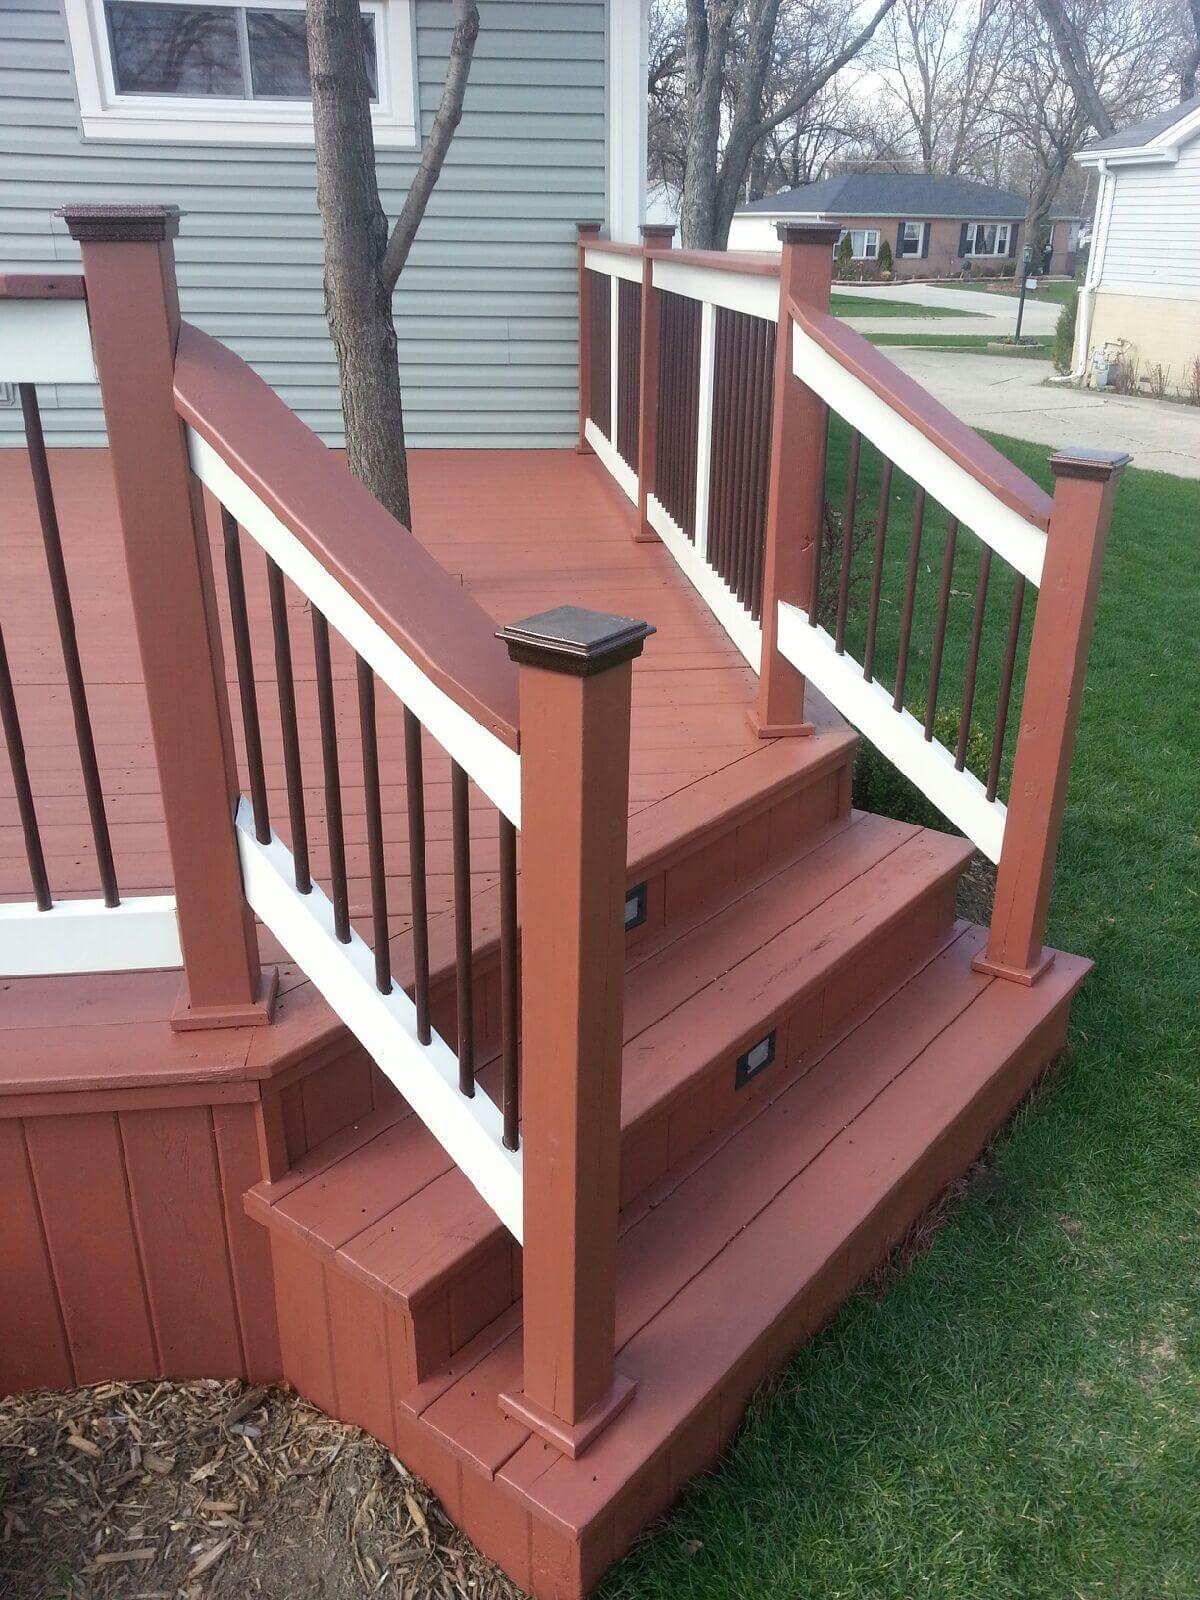 Repairs and maintenance for your deck, fence, and exterior wood staining. - Deck Staining Naperville - Deck Cleaning Services